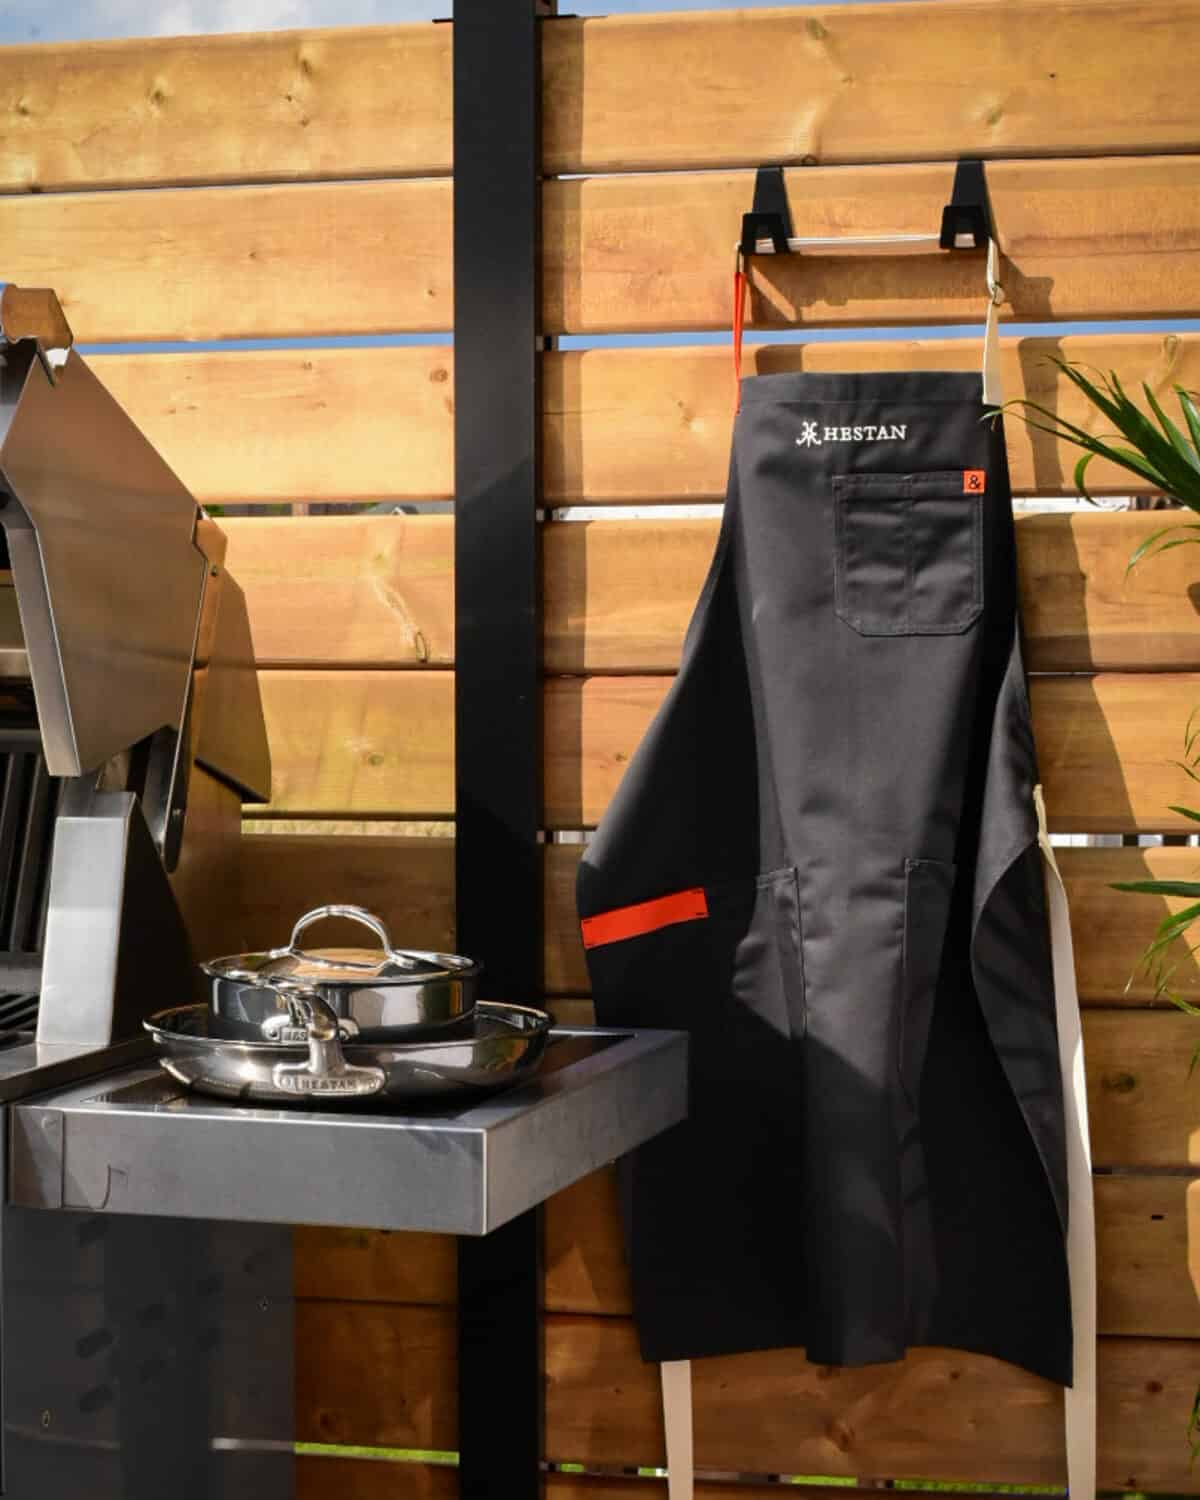 An apron is hanging outdoors beside a grill with pots and pans.